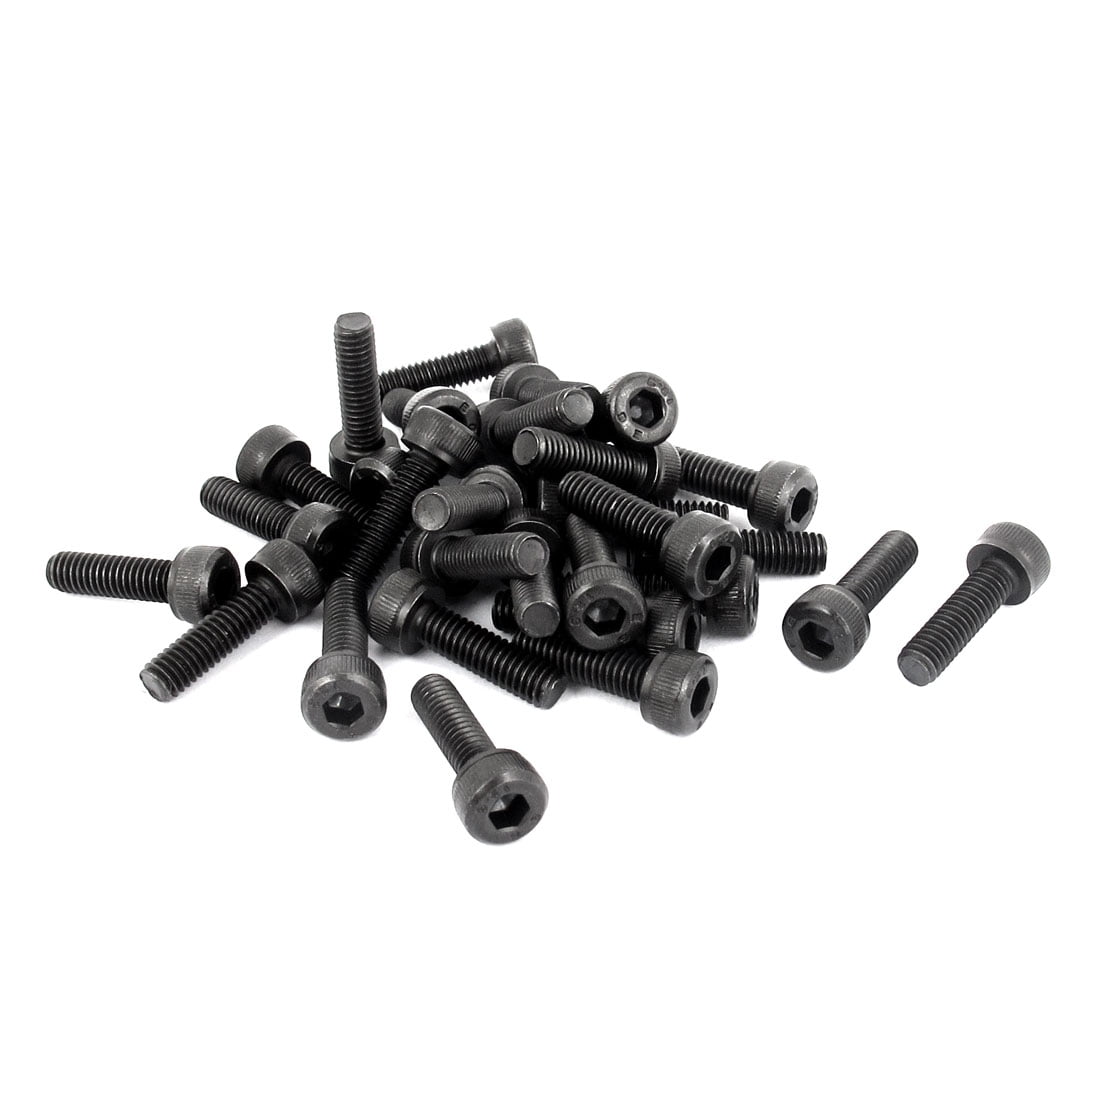 uxcell M4 x 14mm Fully Thread Phillips Round Head Machine Screws Bolts Fasteners 50PCS a16111800ux0946 